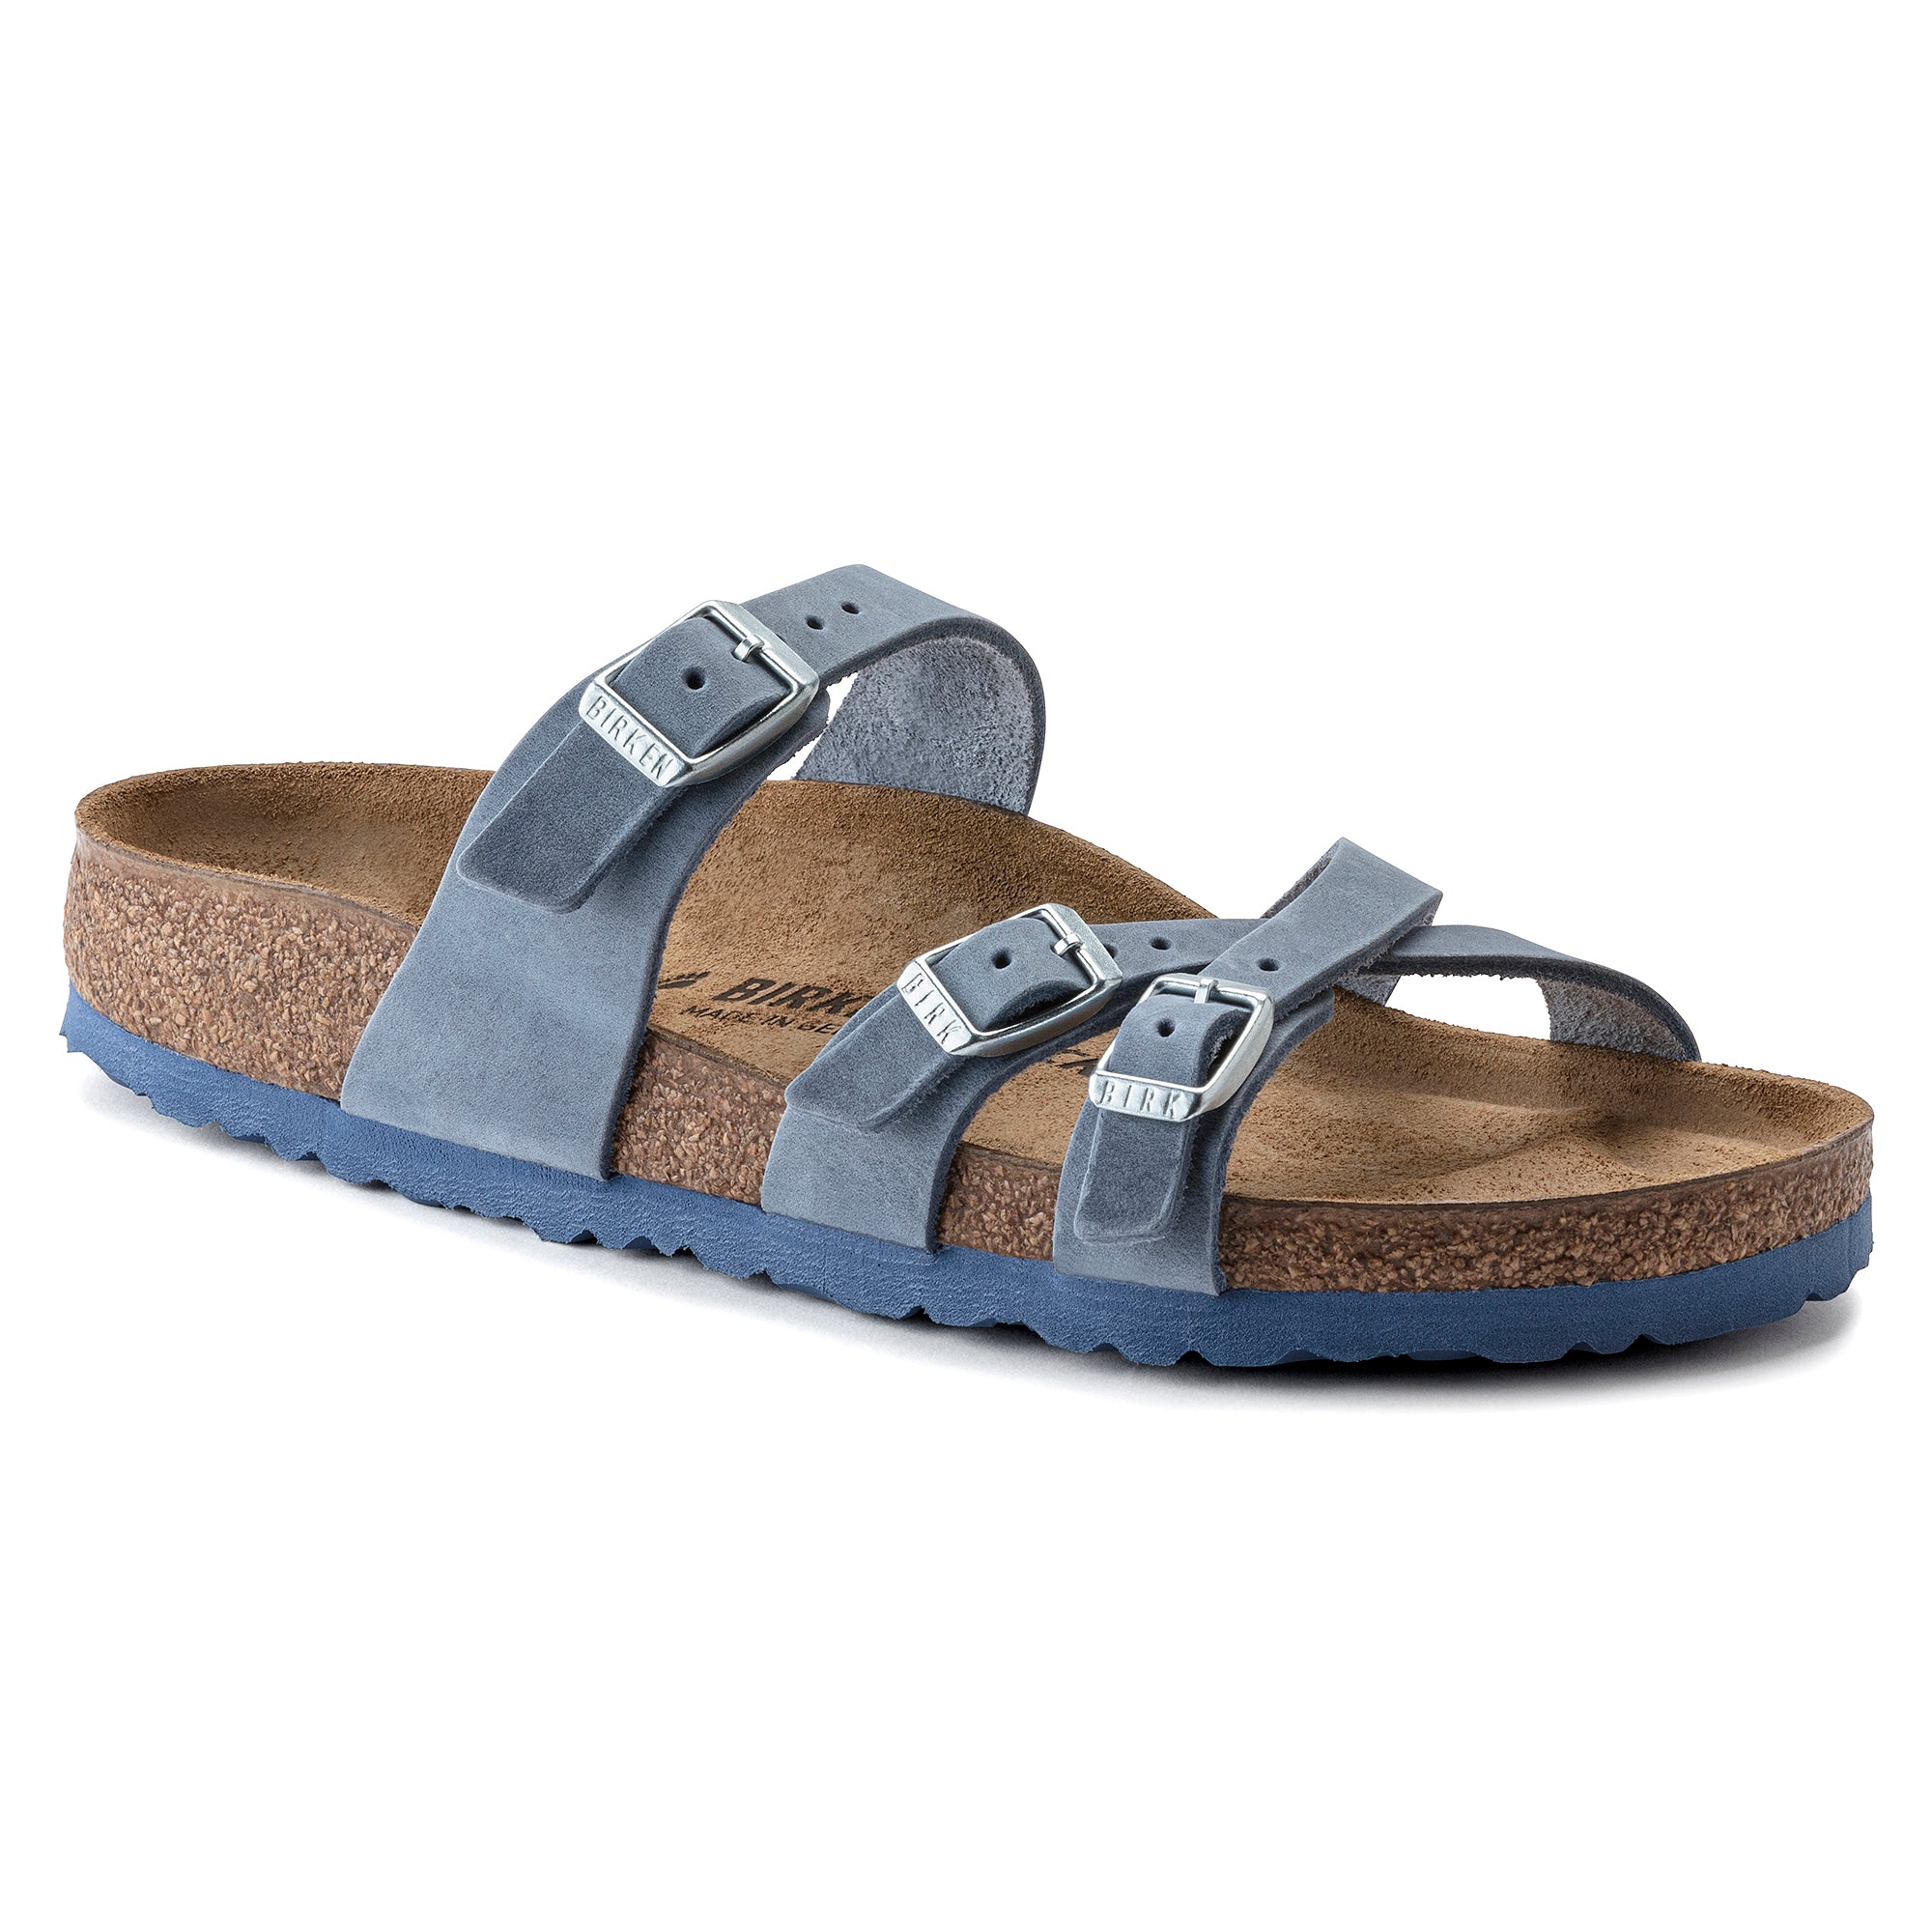 Birkenstock Limited Edition Franca dusty blue oiled leather